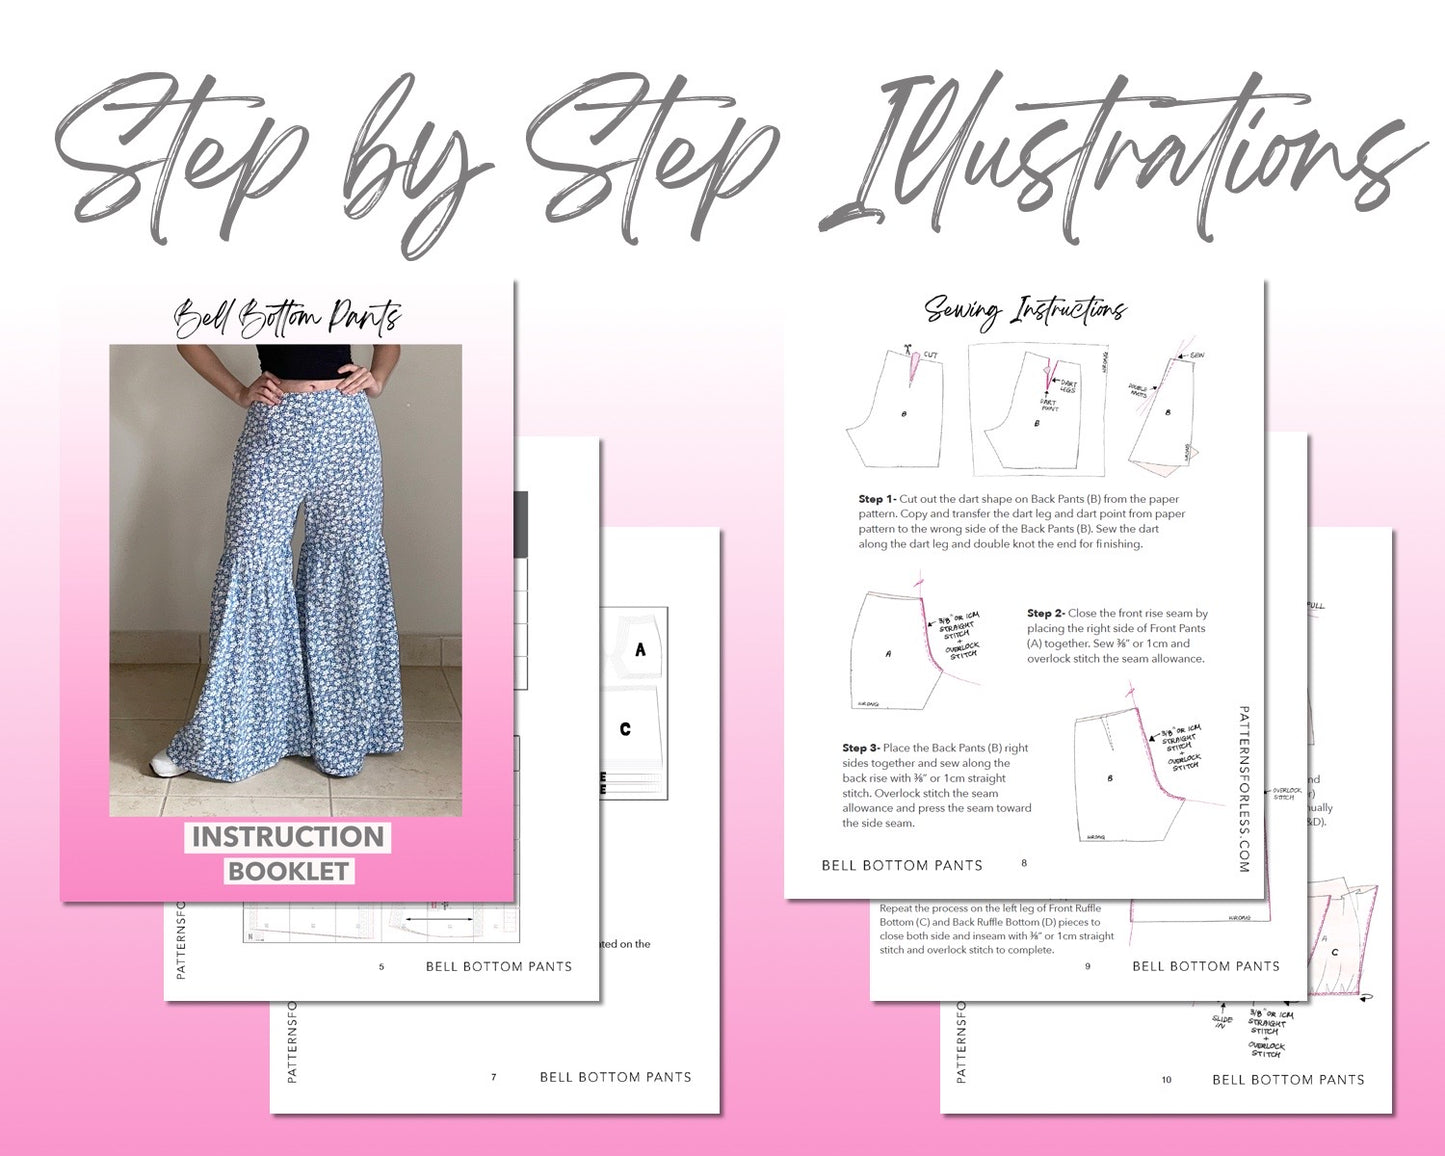 Bell Bottom Pants sewing pattern step by step illustrations.